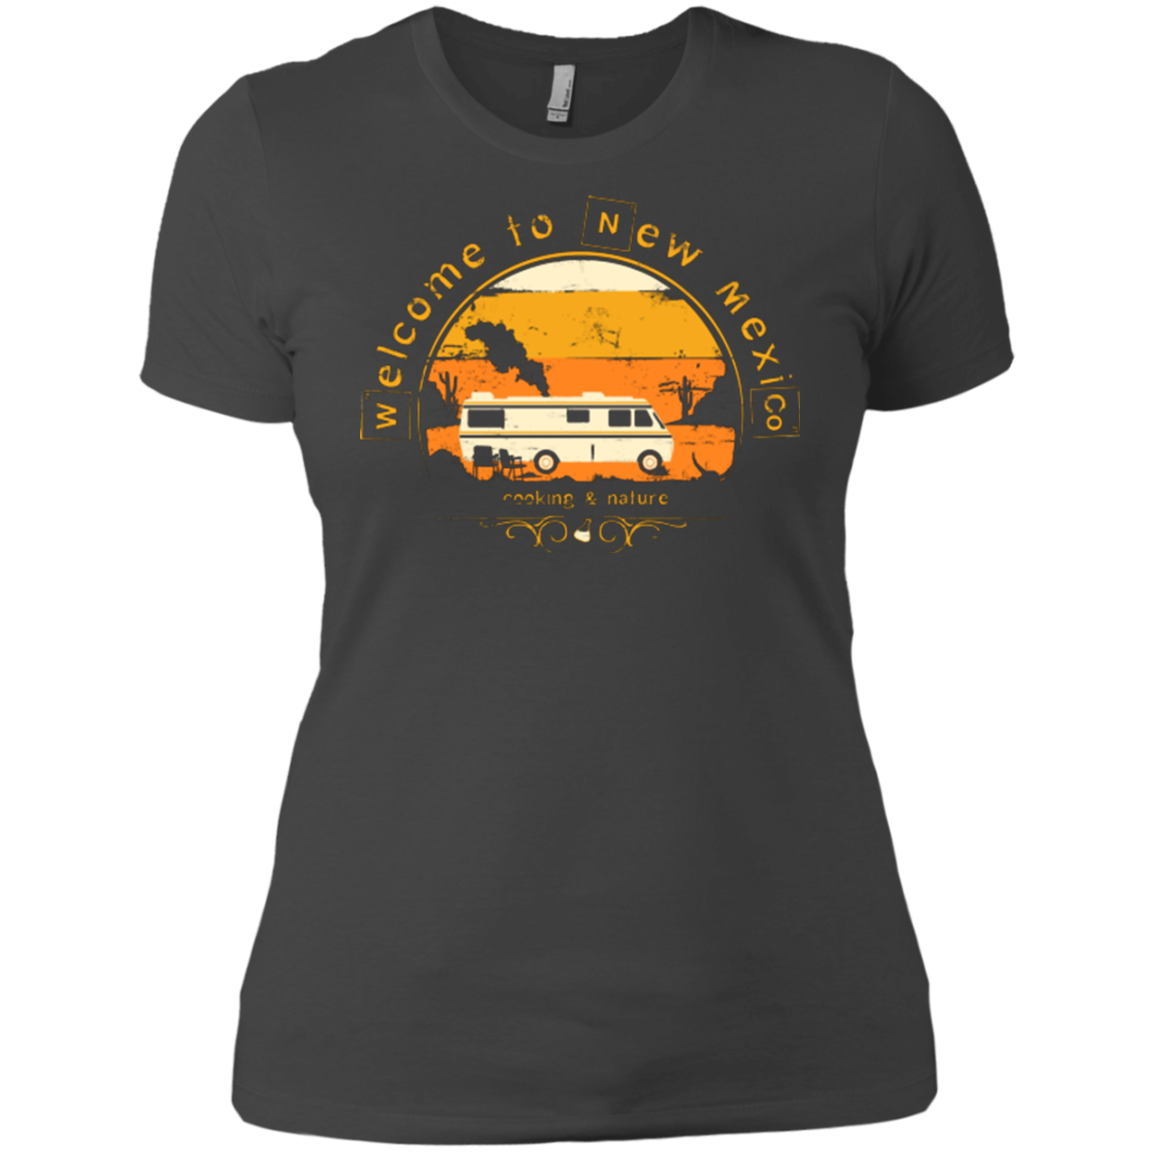 Welcome to New Mexico Women's Premium T-Shirt